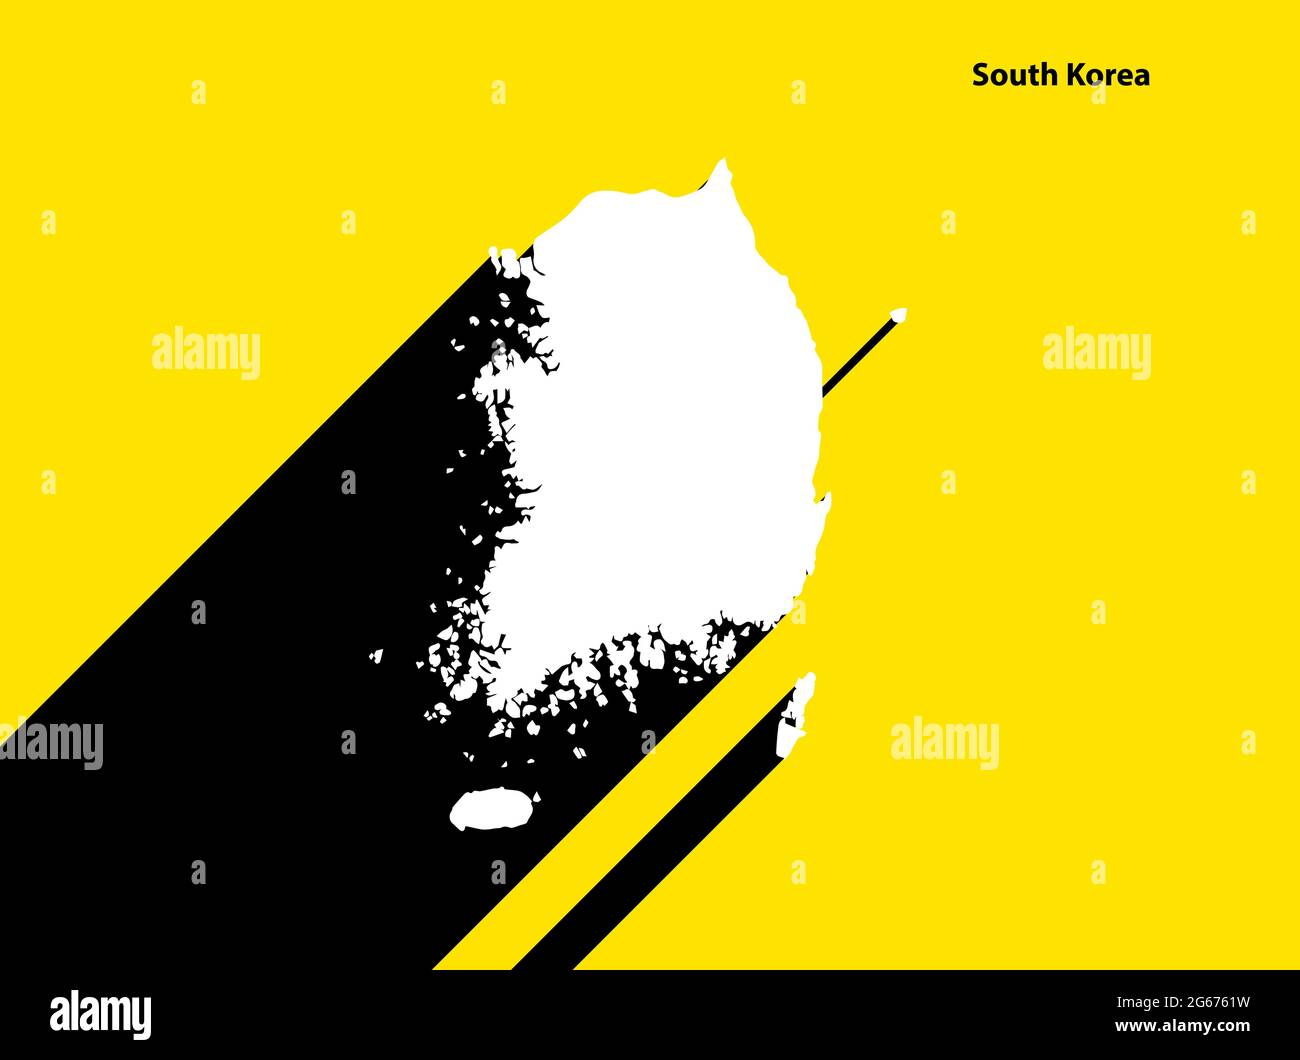 South Korea Map on retro poster with long shadow. Vintage sign easy to edit, manipulate, resize or colourise. Stock Vector